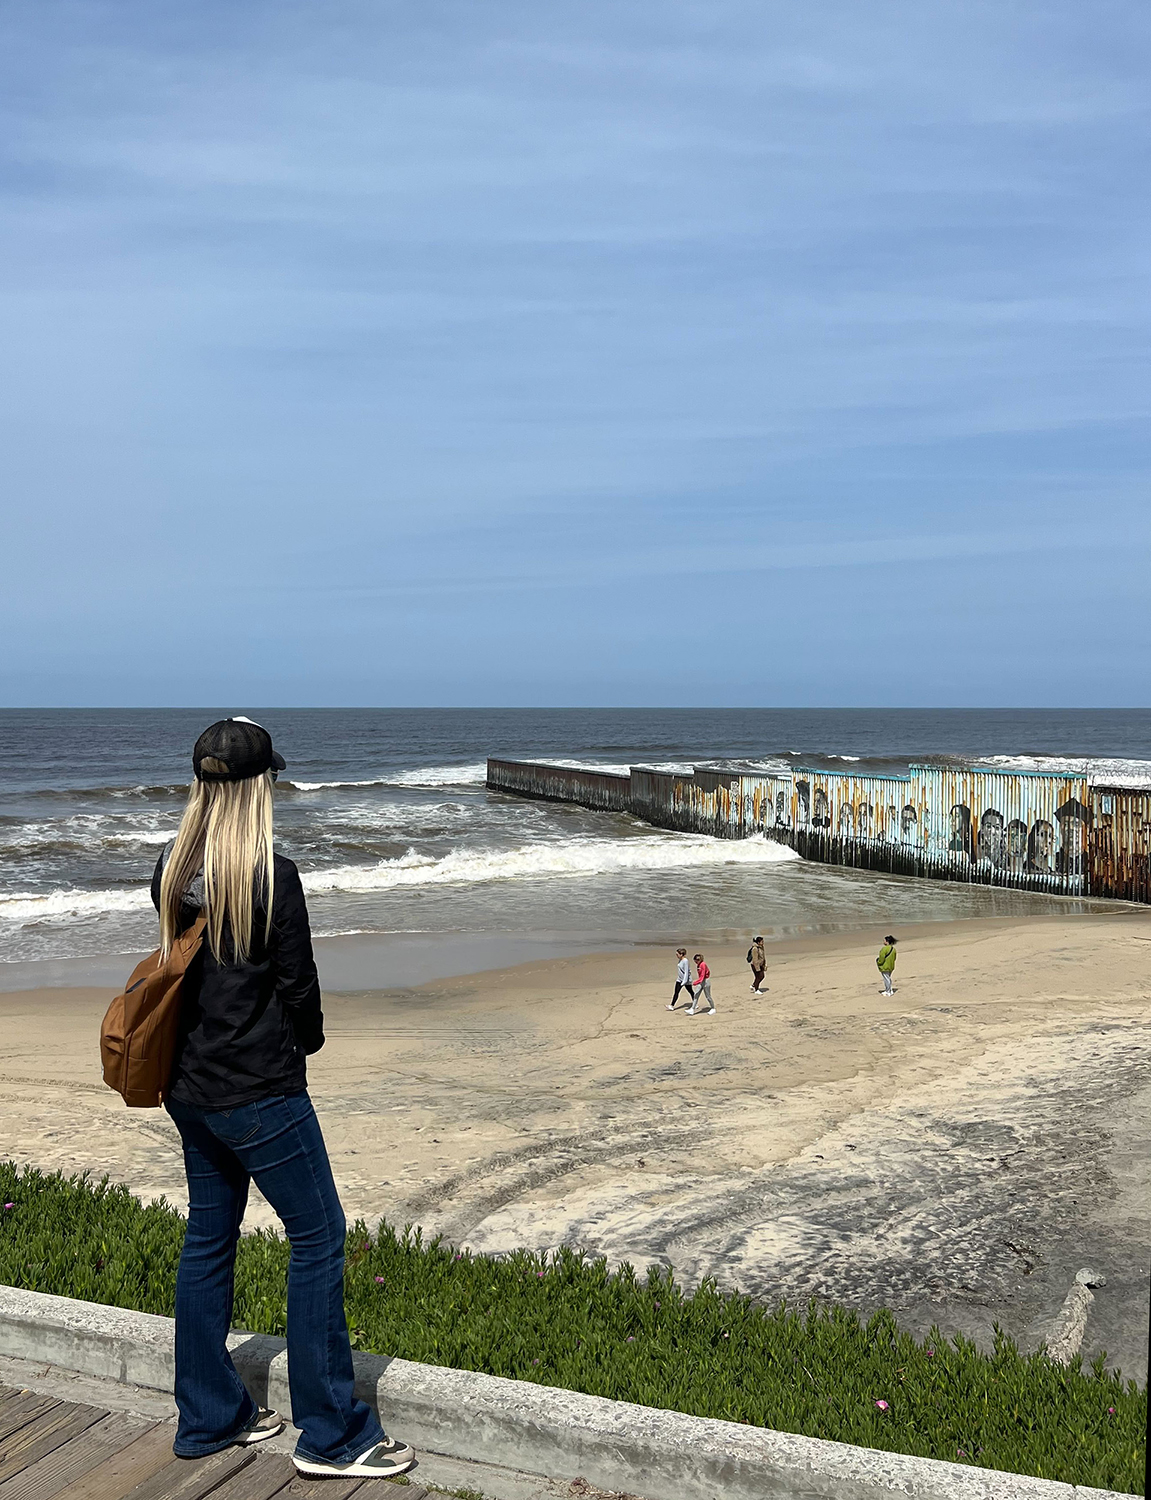 Bri Stensrud looks out over the border wall stretching off the beach and into the water. Courtesy of Stensrud